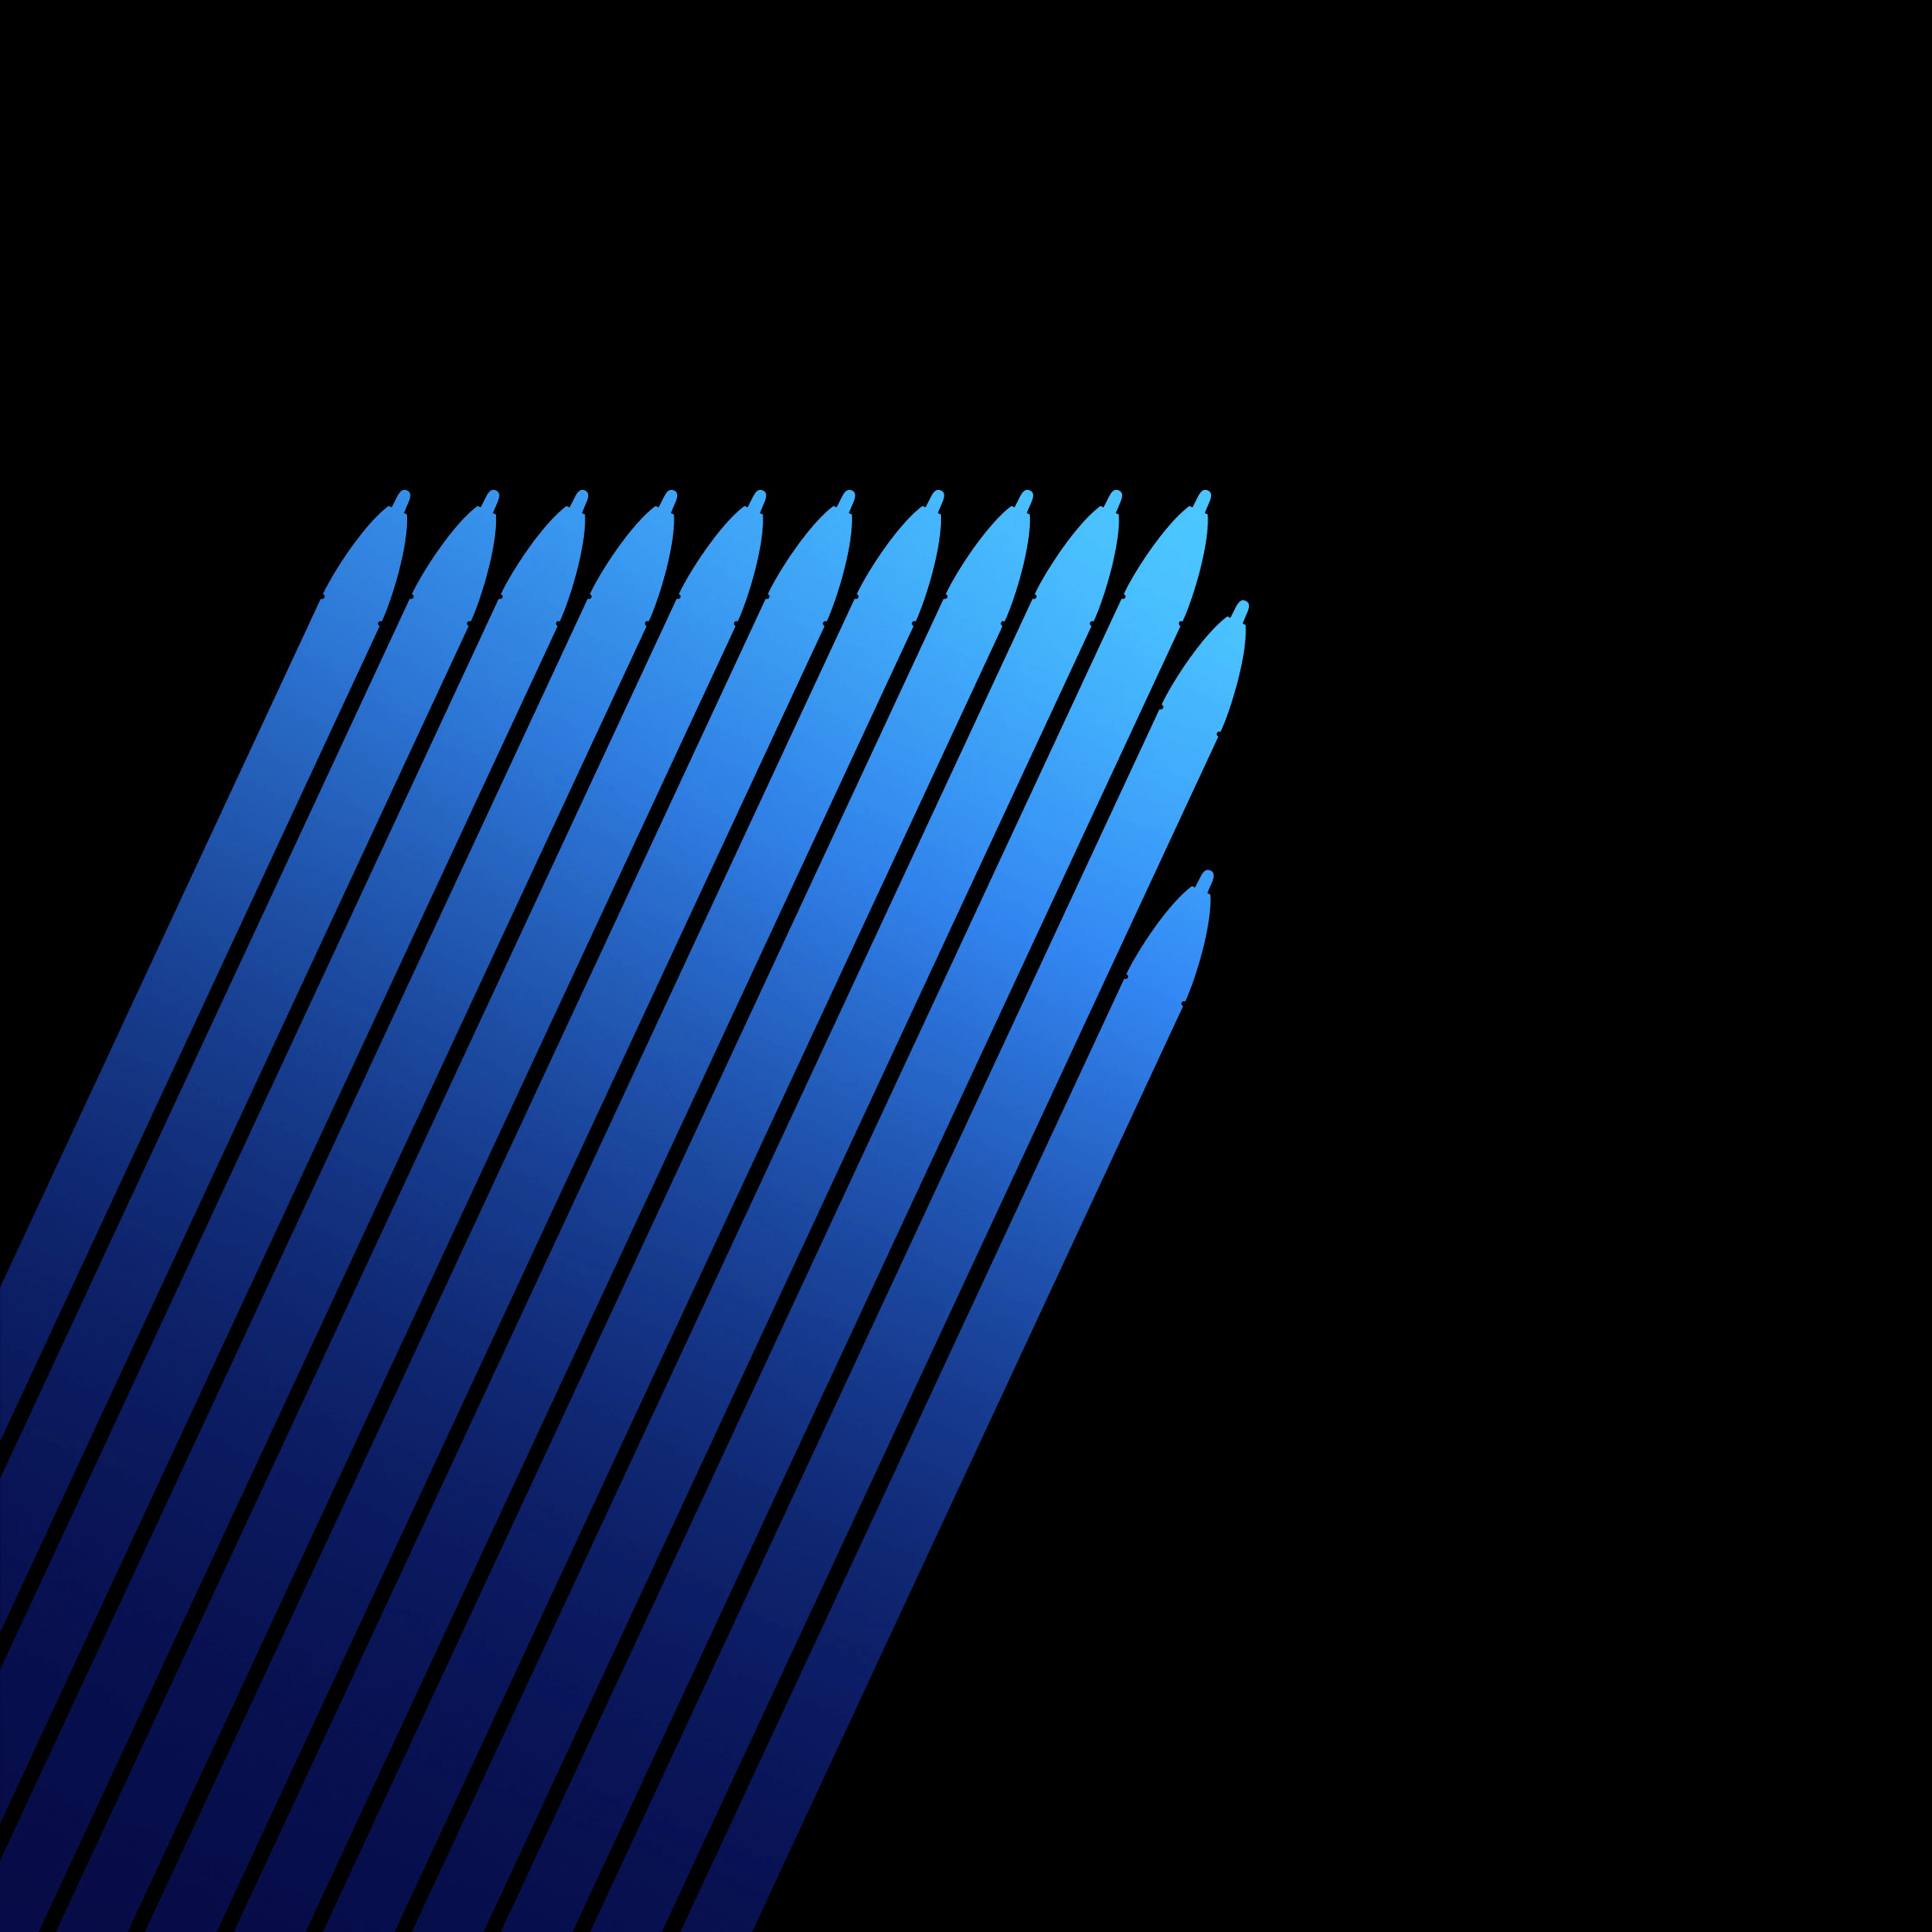 Get the official QHD Samsung Galaxy Note7 wallpaper here